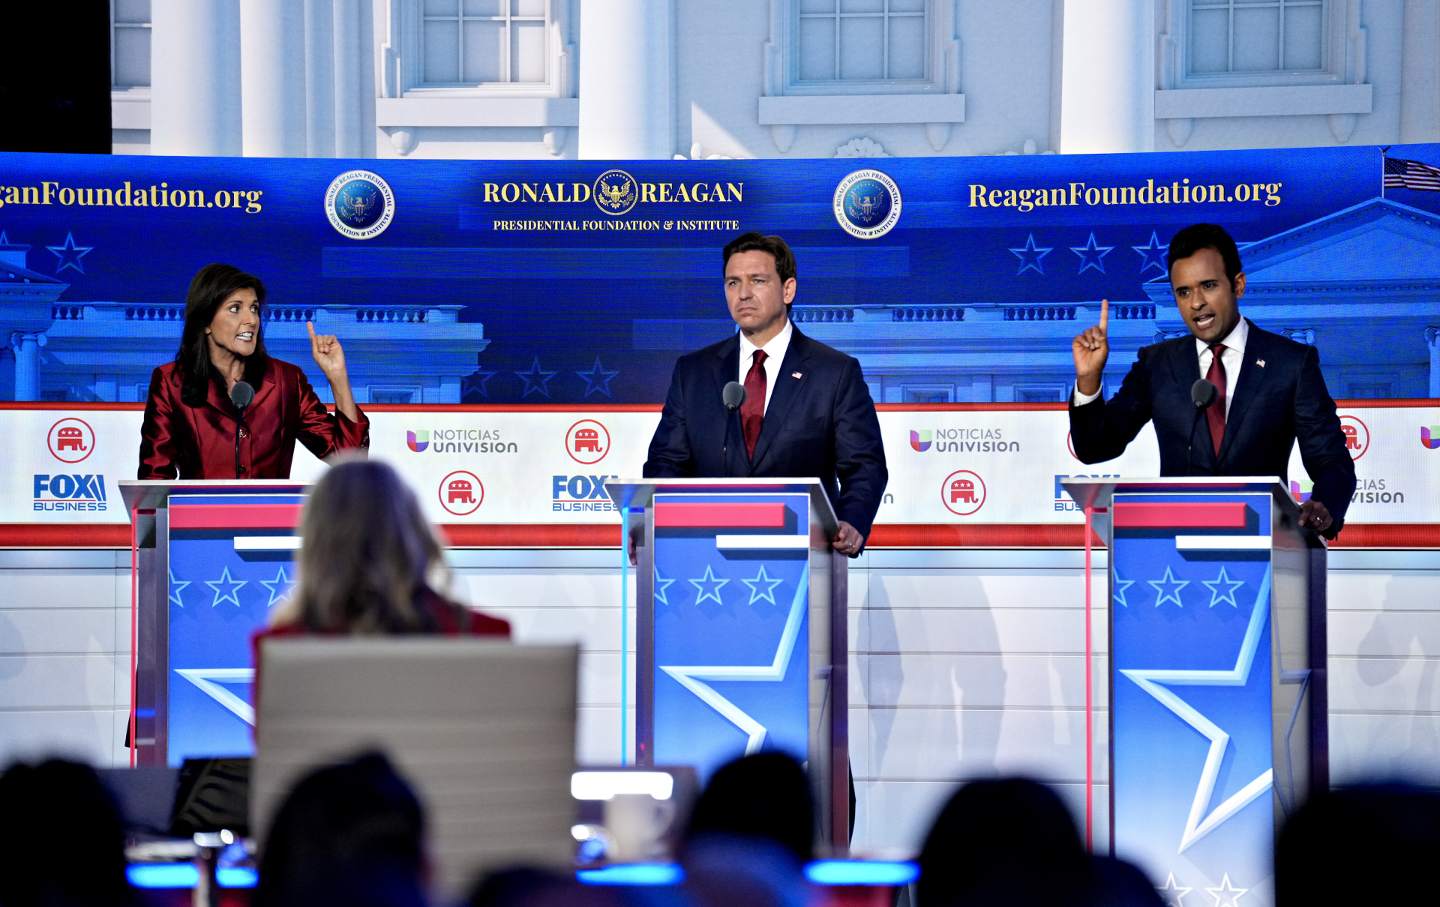 Nikki Haley, Ron DeSantis, and Vivek Ramaswamy at podiums at the Republican presidential debate. Haley and Ramaswamy have their index fingers raised, while DeSantis stares into the middle distance.